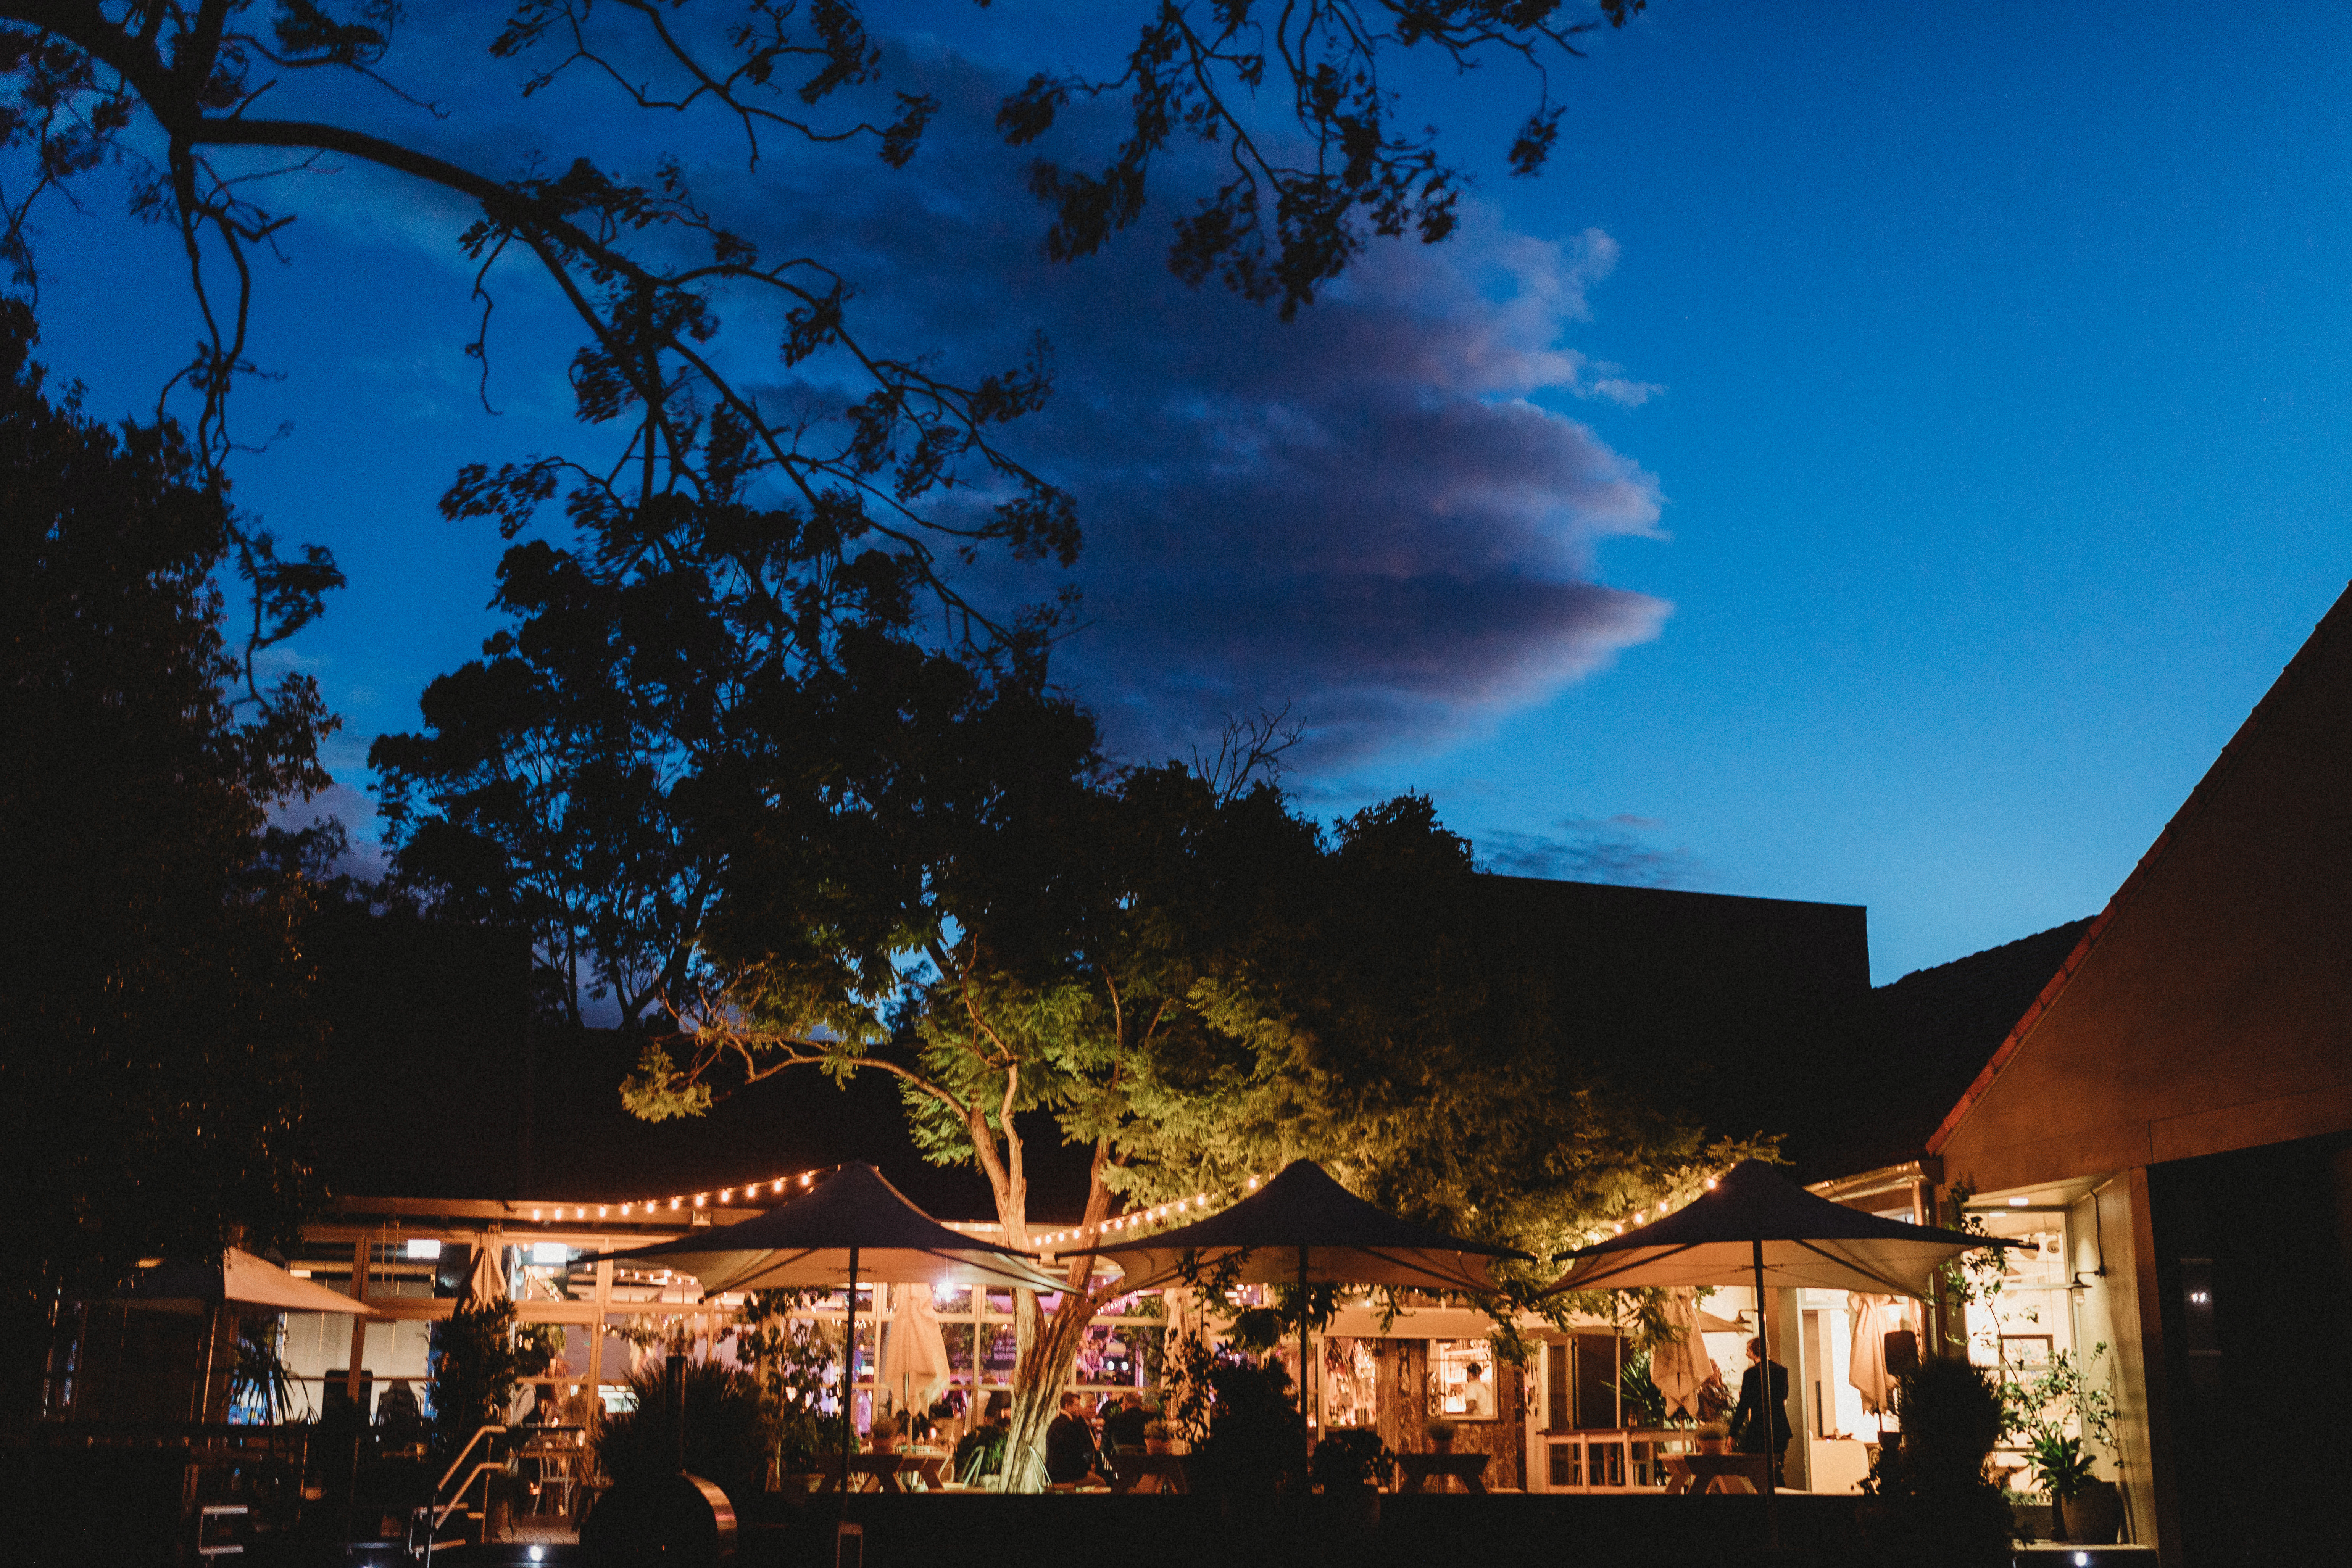 This is an evening photo of the Hazelhurst Art Centre and Cafe, beautifully illuminated against the night sky. The cafe's warm lighting and string lights create a welcoming ambiance in the outdoor seating area under large umbrellas, with trees and the dark blue twilight sky in the background. The cafe's inviting glow suggests a cozy atmosphere for dining and socialising.